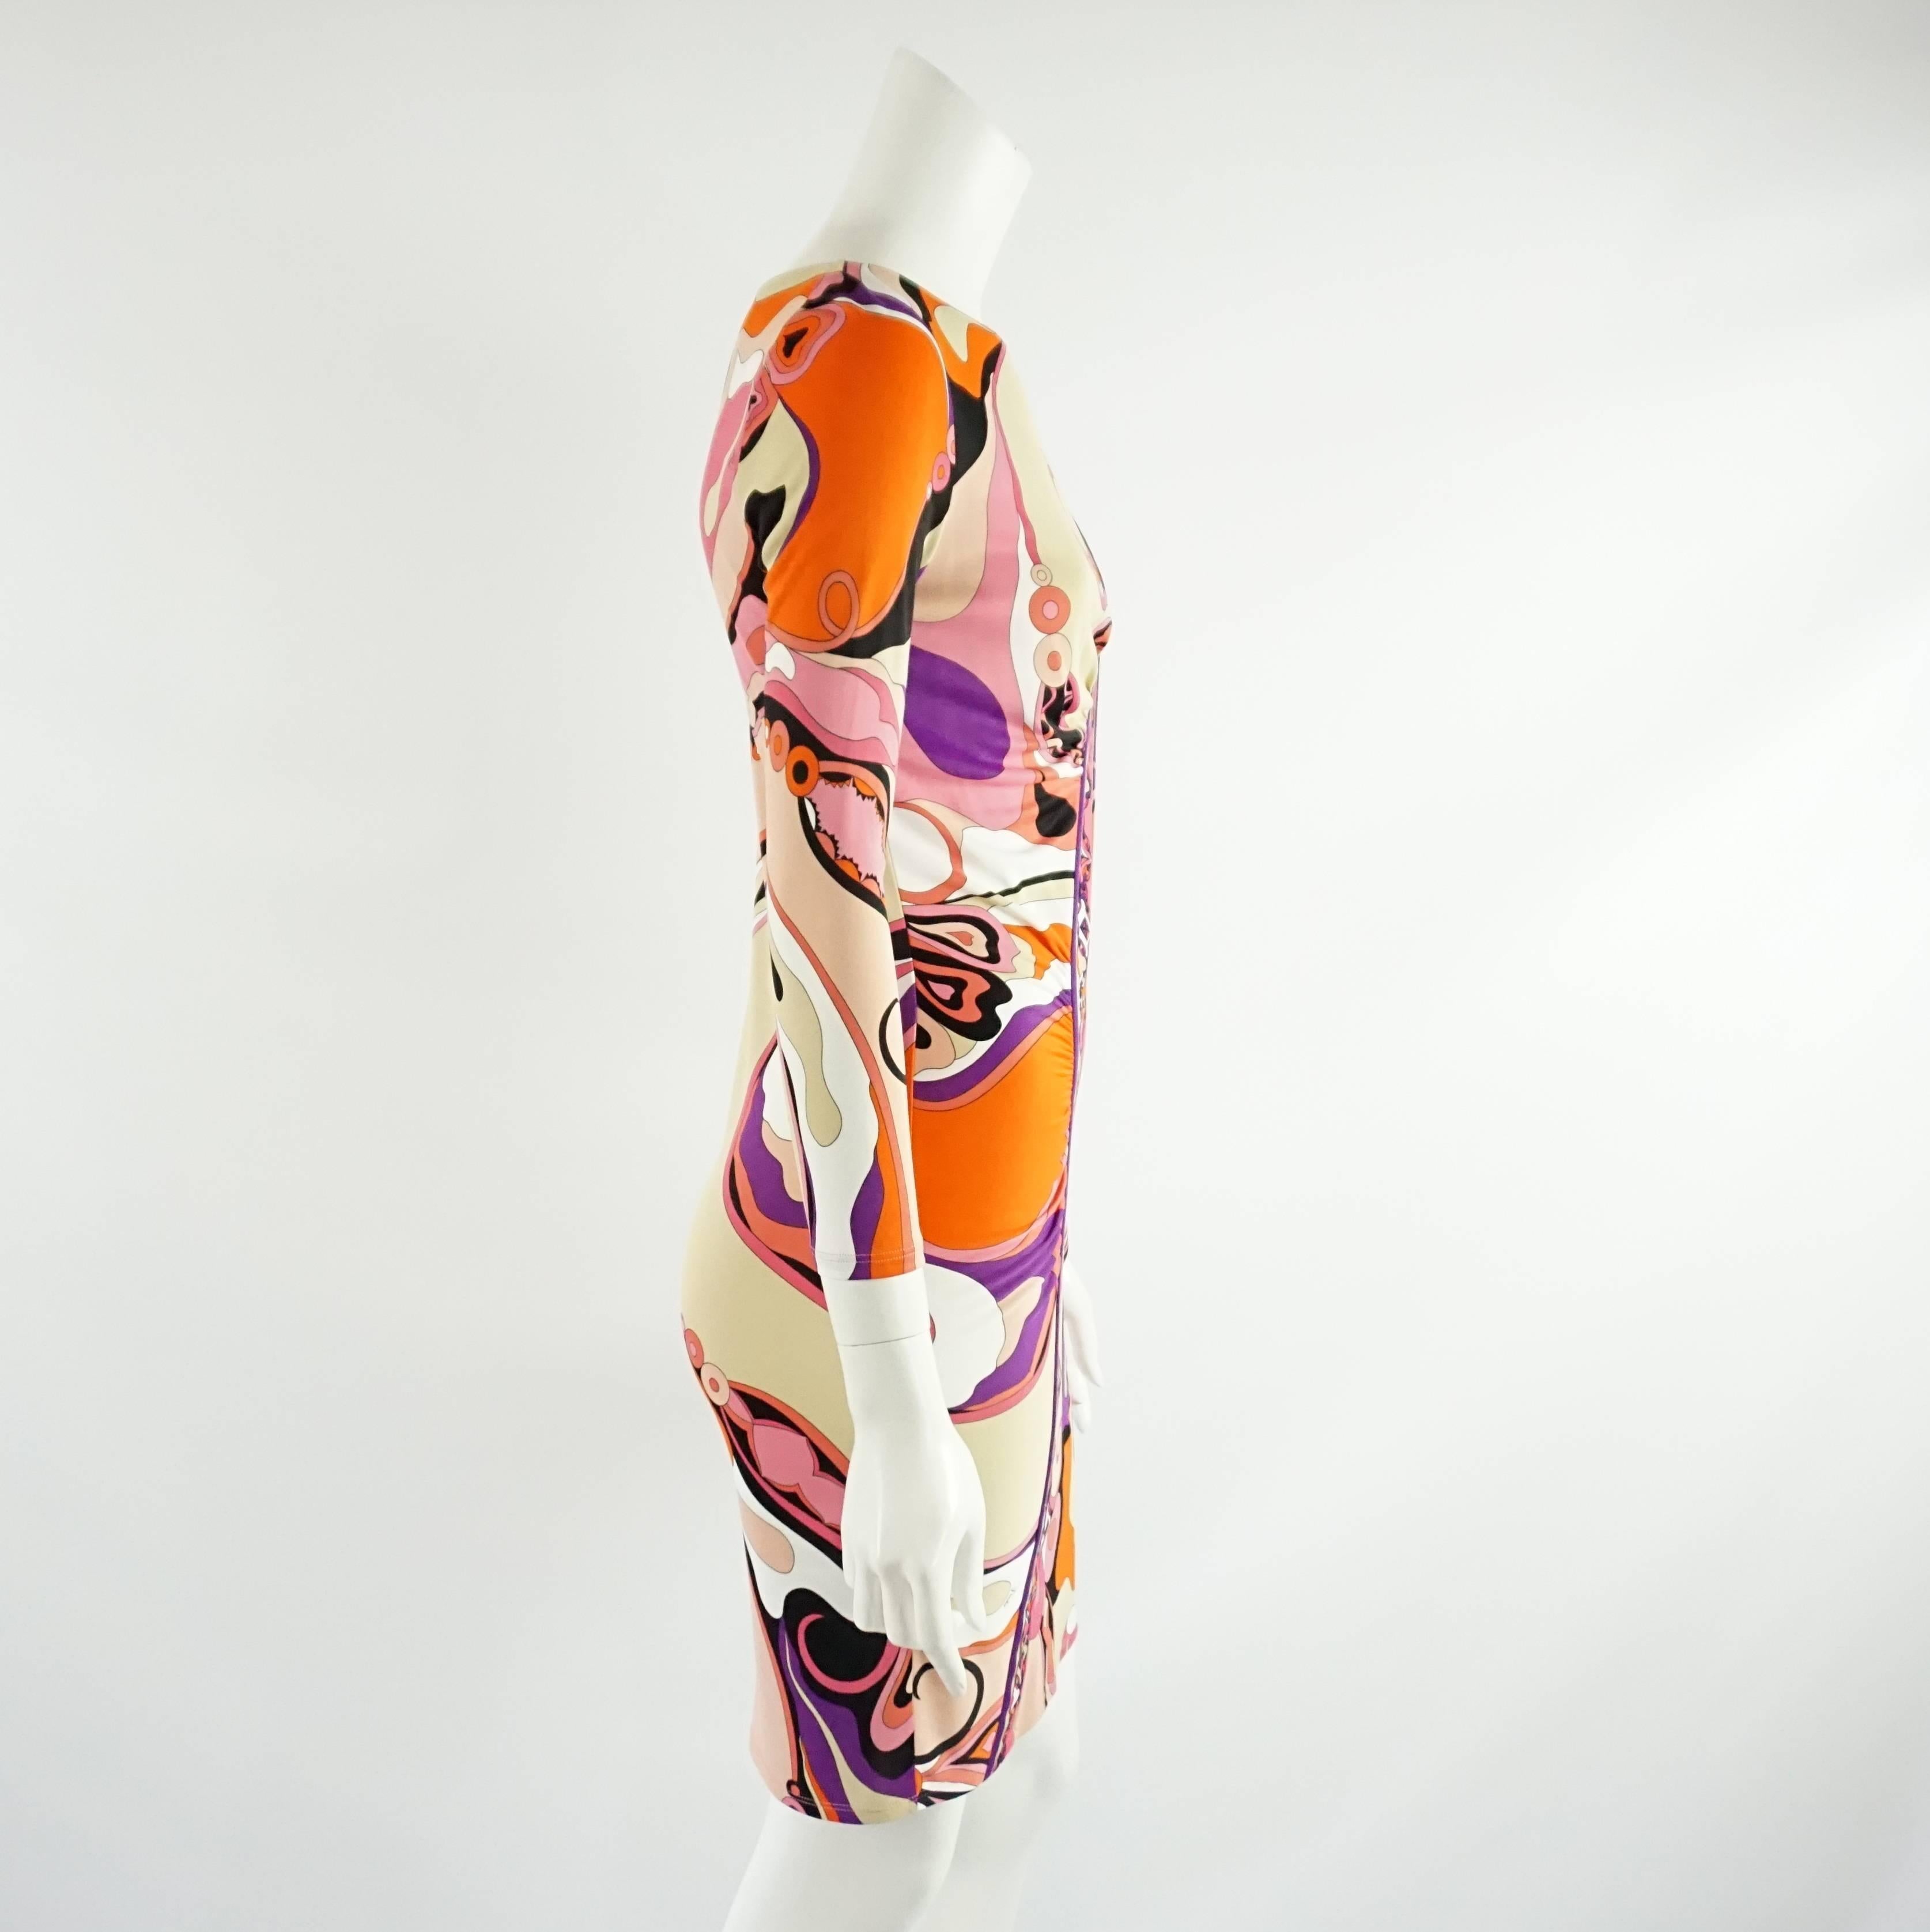 This fun Emilio Pucci dress has long sleeves and features an orange, pink, and purple print. This dress is in very good condition with some minor wear and is a size 6.

Measurements
Shoulder to Shoulder: 14"
Sleeve Length: 22"
Bust: